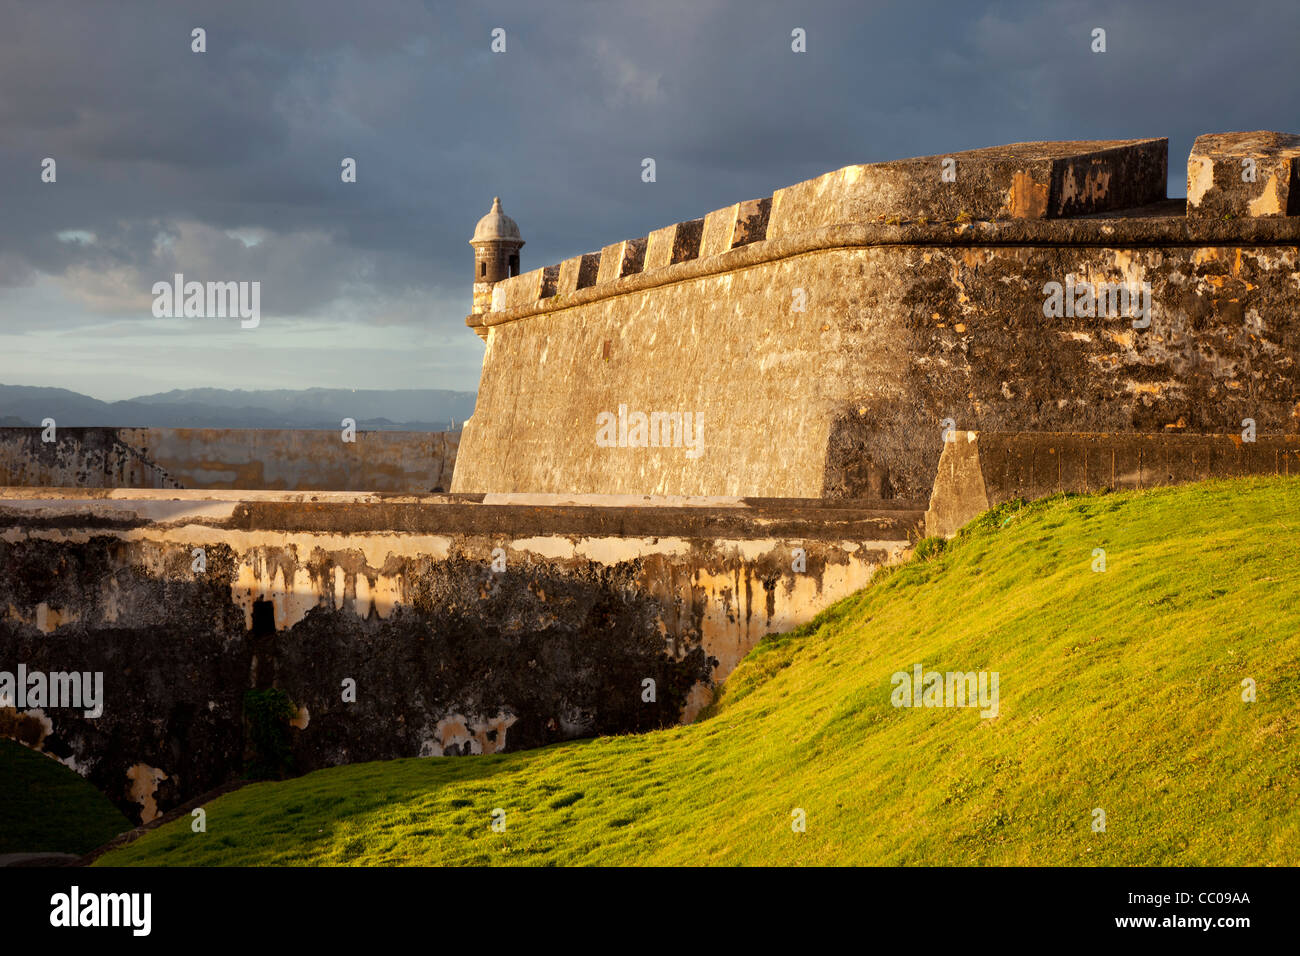 Historic Spanish fort - El Morro at the entrance to the harbor in old San Juan Puerto Rico Stock Photo